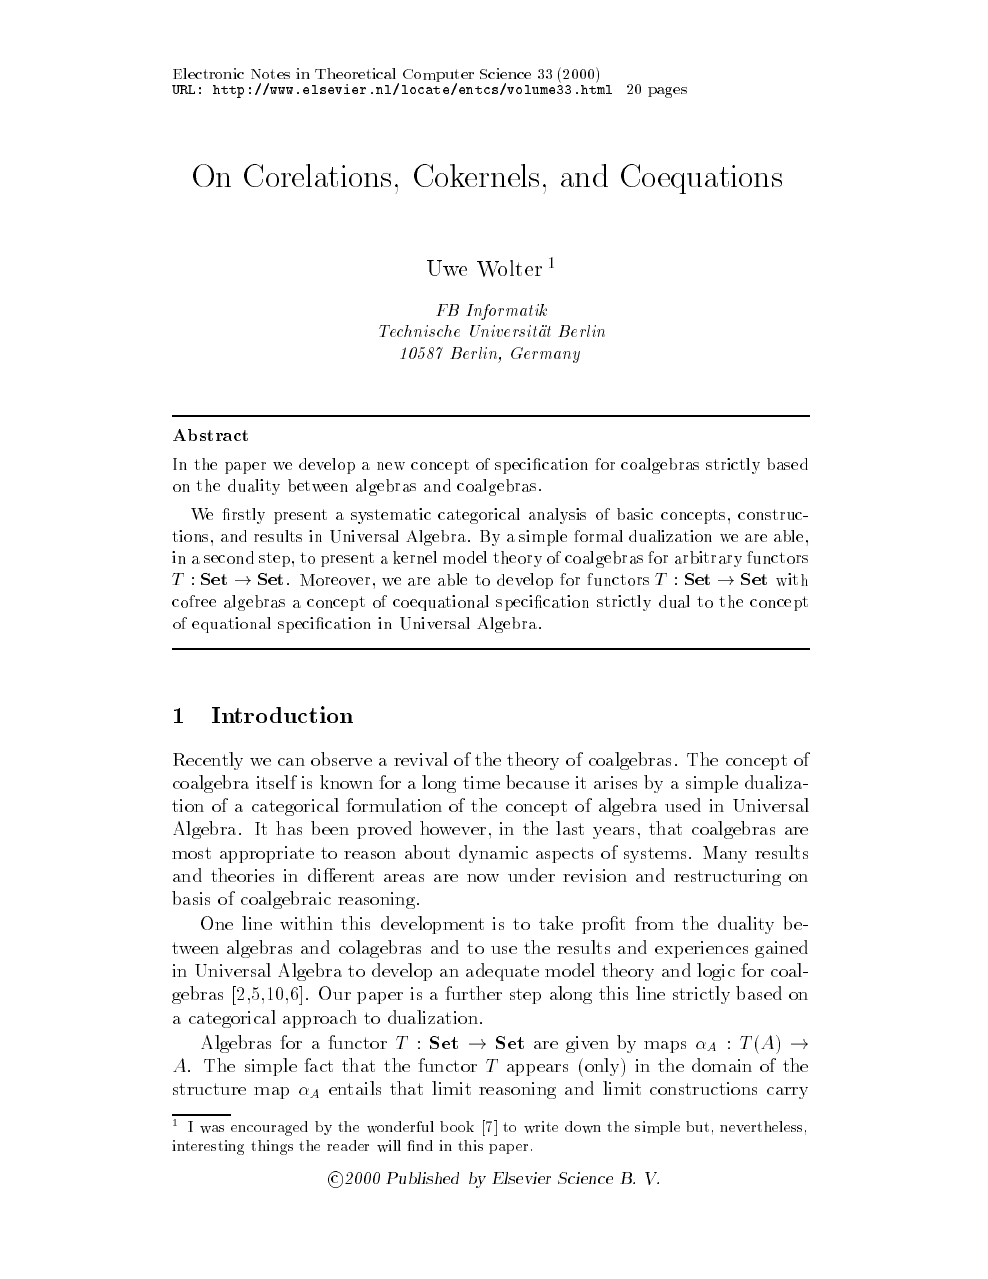 On Corelations Cokernels And Coequations Topic Of Research Paper In Computer And Information Sciences Download Scholarly Article Pdf And Read For Free On Cyberleninka Open Science Hub